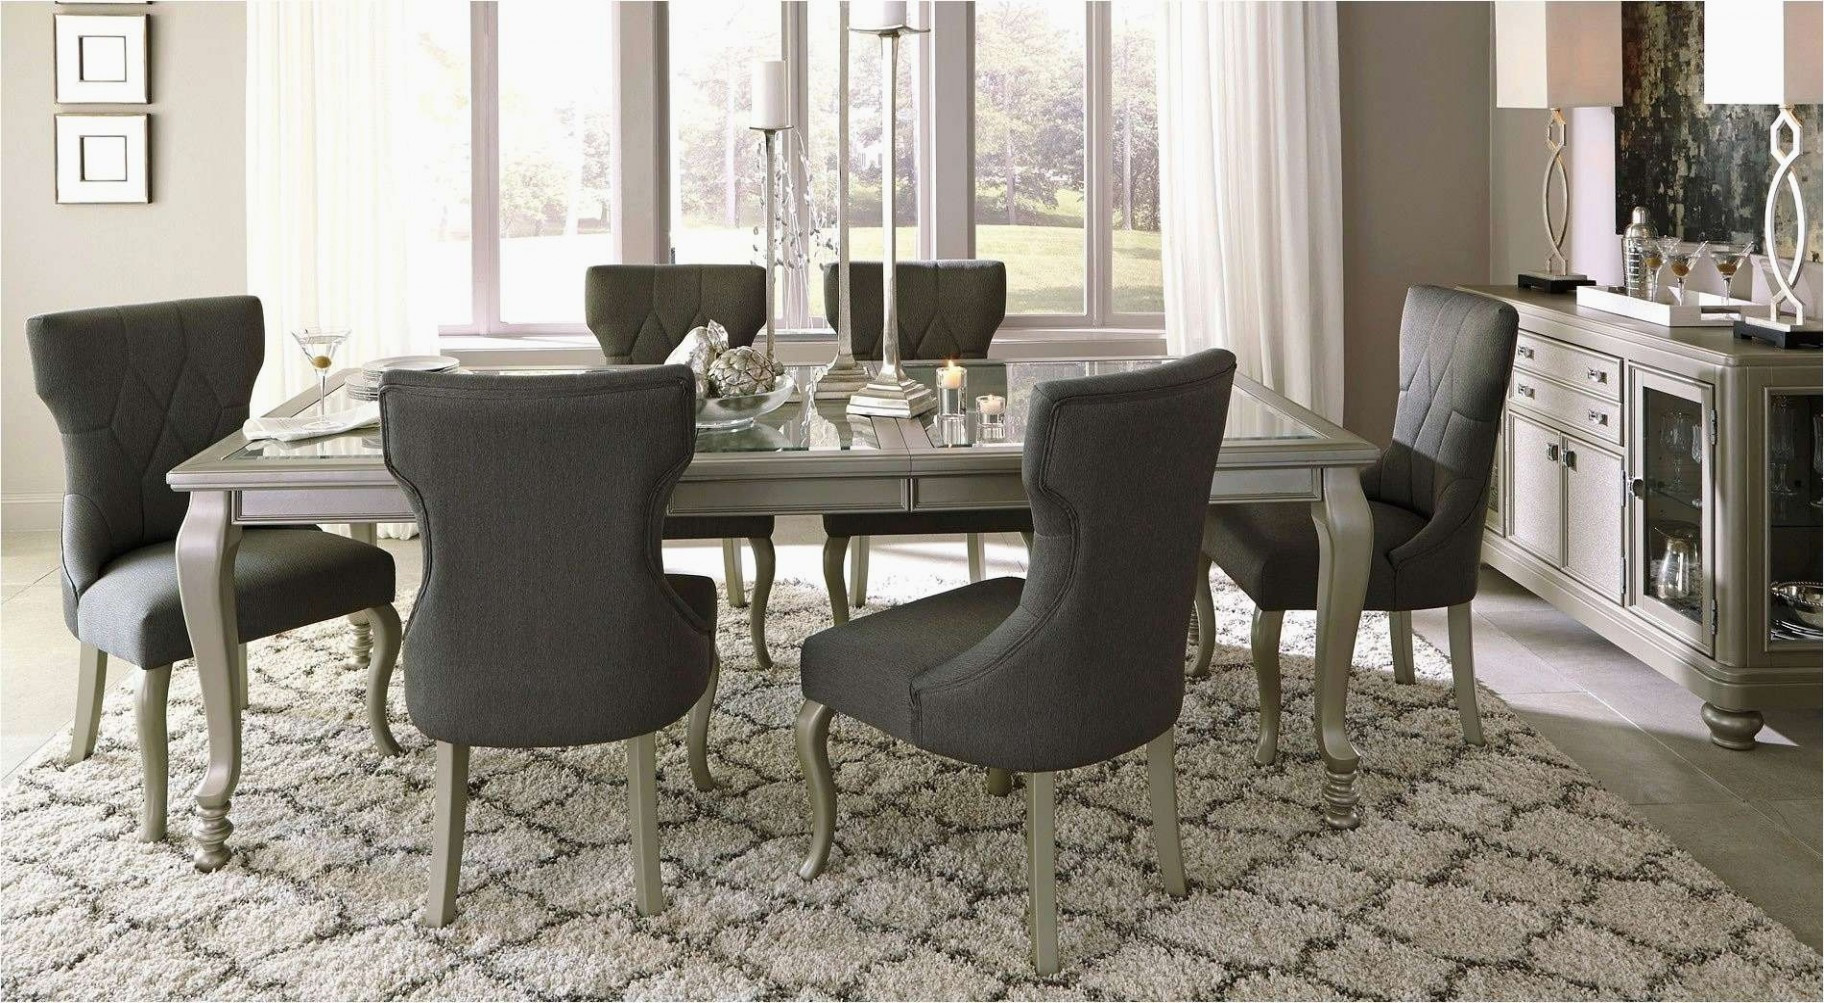 best rugs for hardwood floors in kitchen of 48 lovely dining table carpet rugs on carpet within dining table carpet elegant 32 best rugs under kitchen table trinitycountyfoodbank of dining table carpet 48